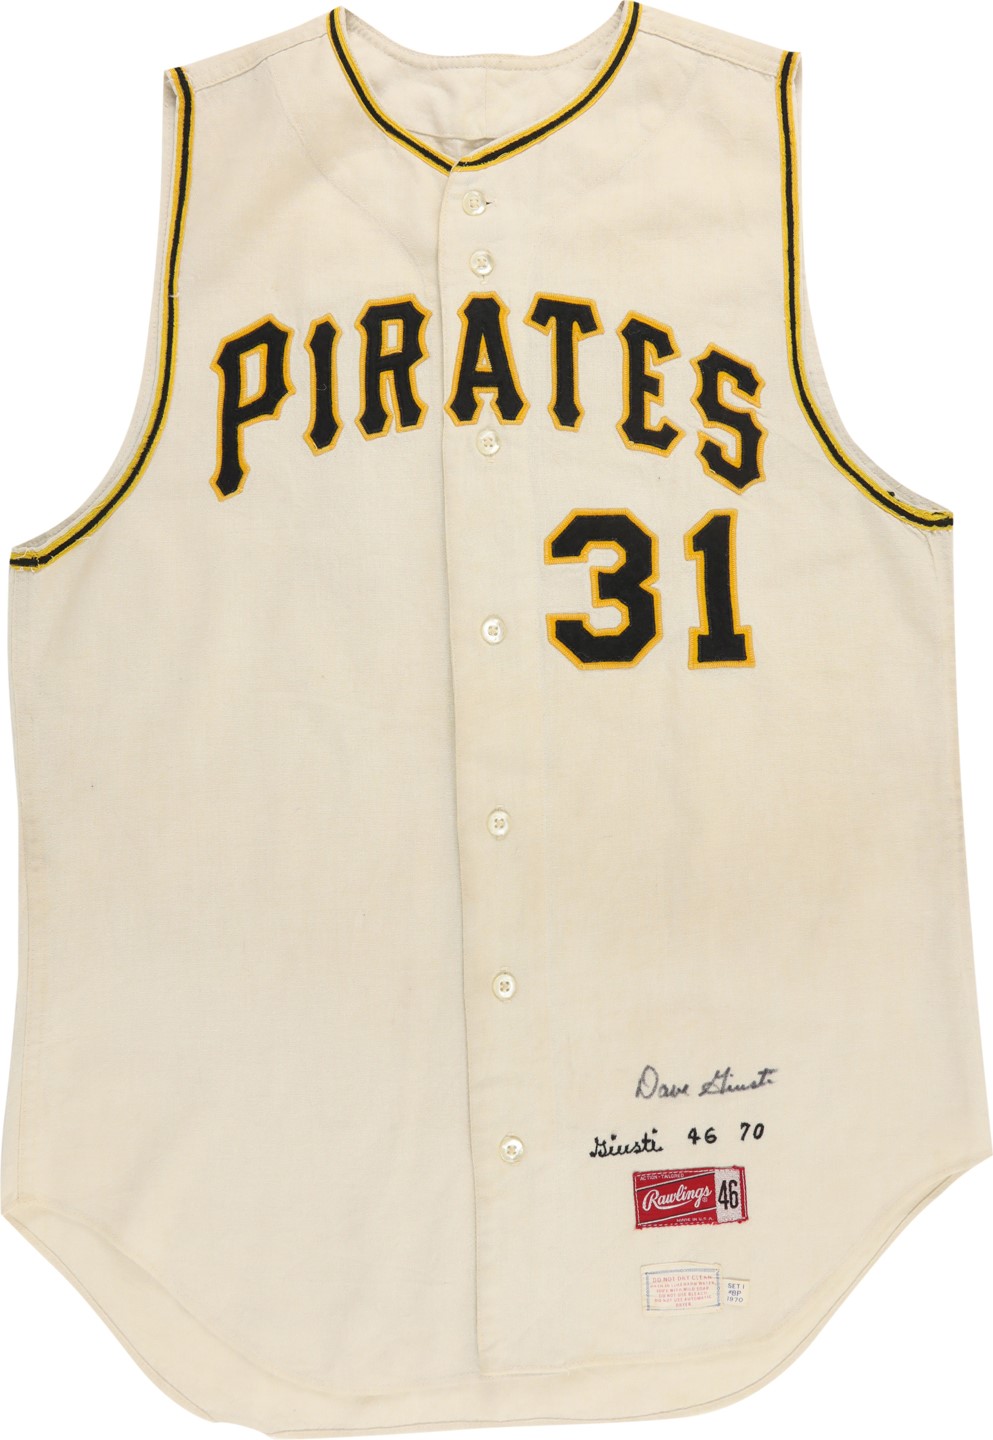 Clemente and Pittsburgh Pirates - 1970 Dave Giusti Pittsburgh Pirates Game Worn Jersey